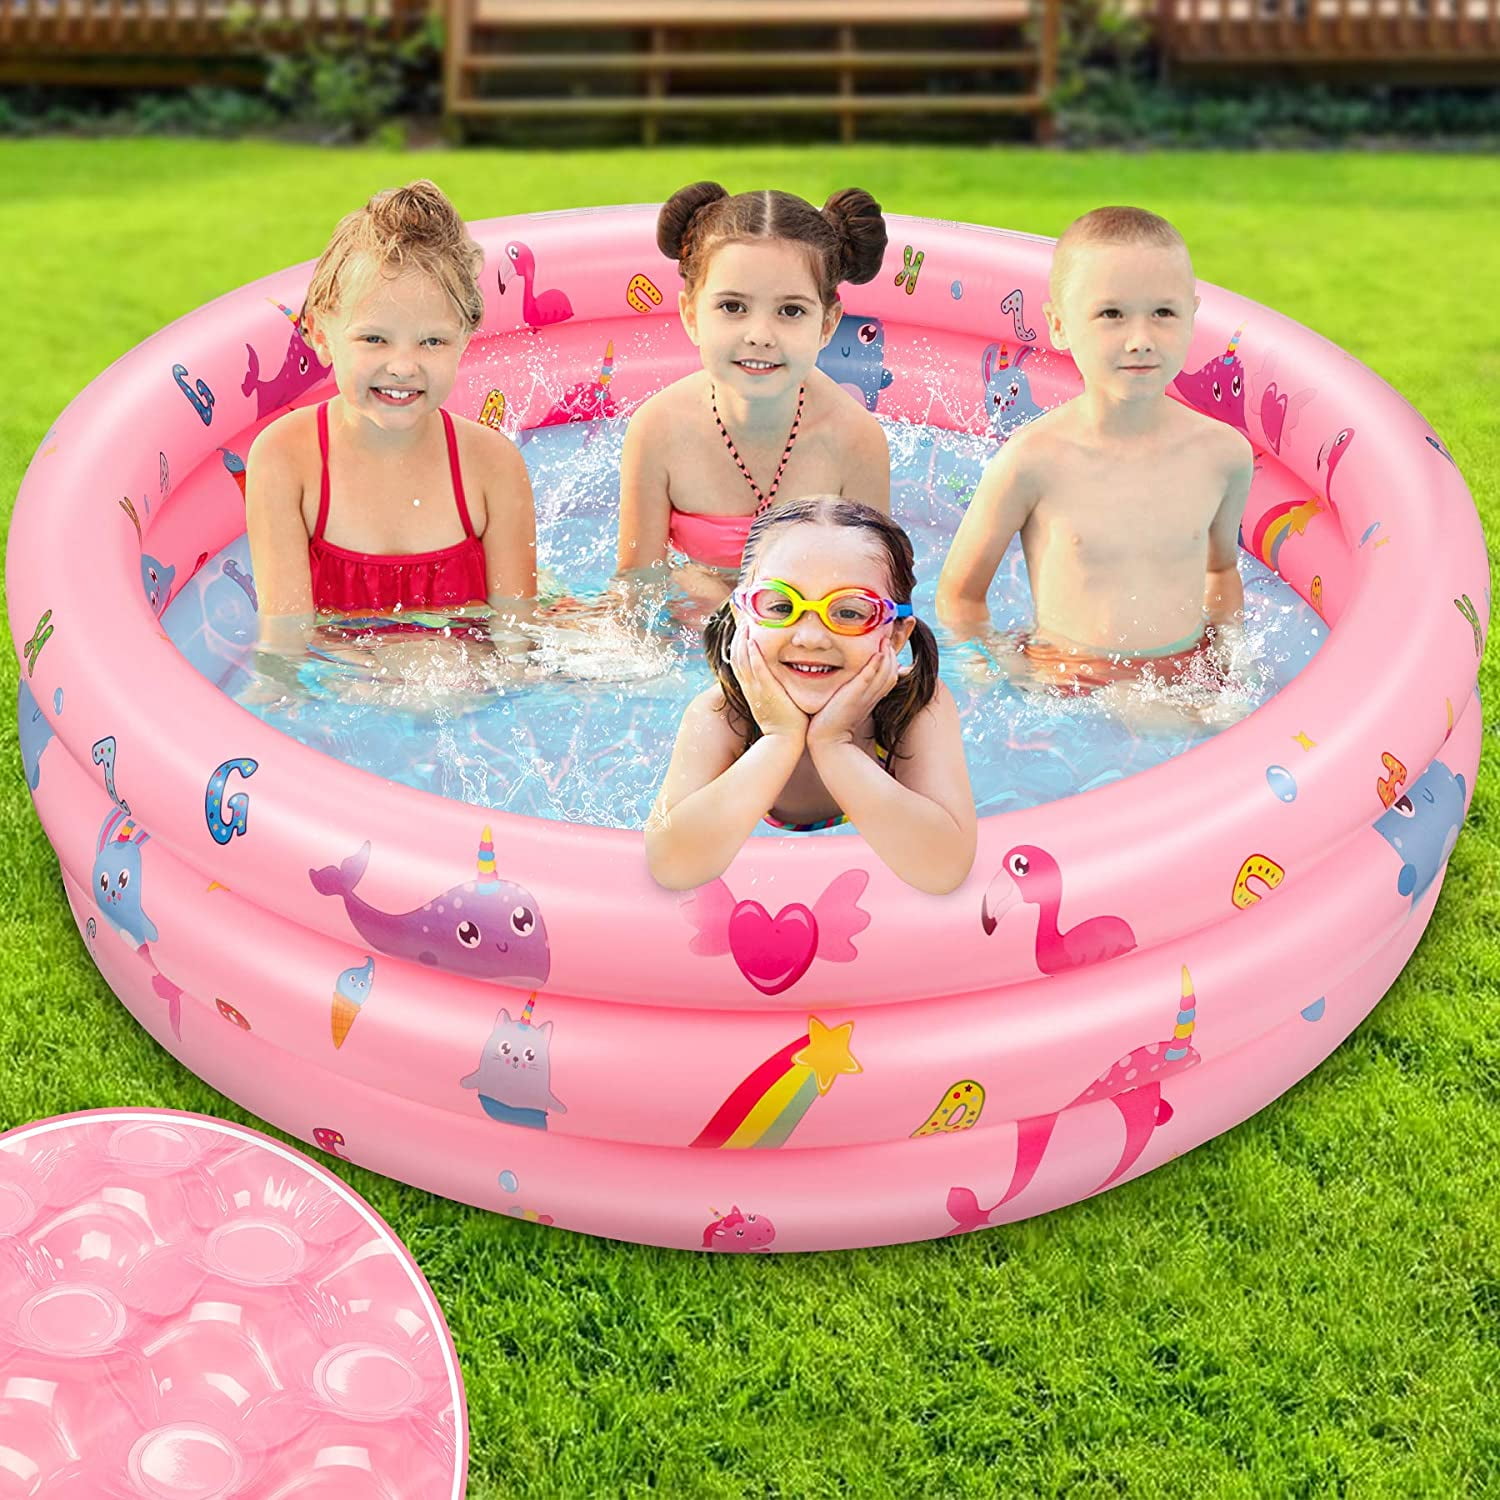 Baby Inflatable Pool Child Toddler Paddling Outdoor Summer Water Fun Skid-proof 